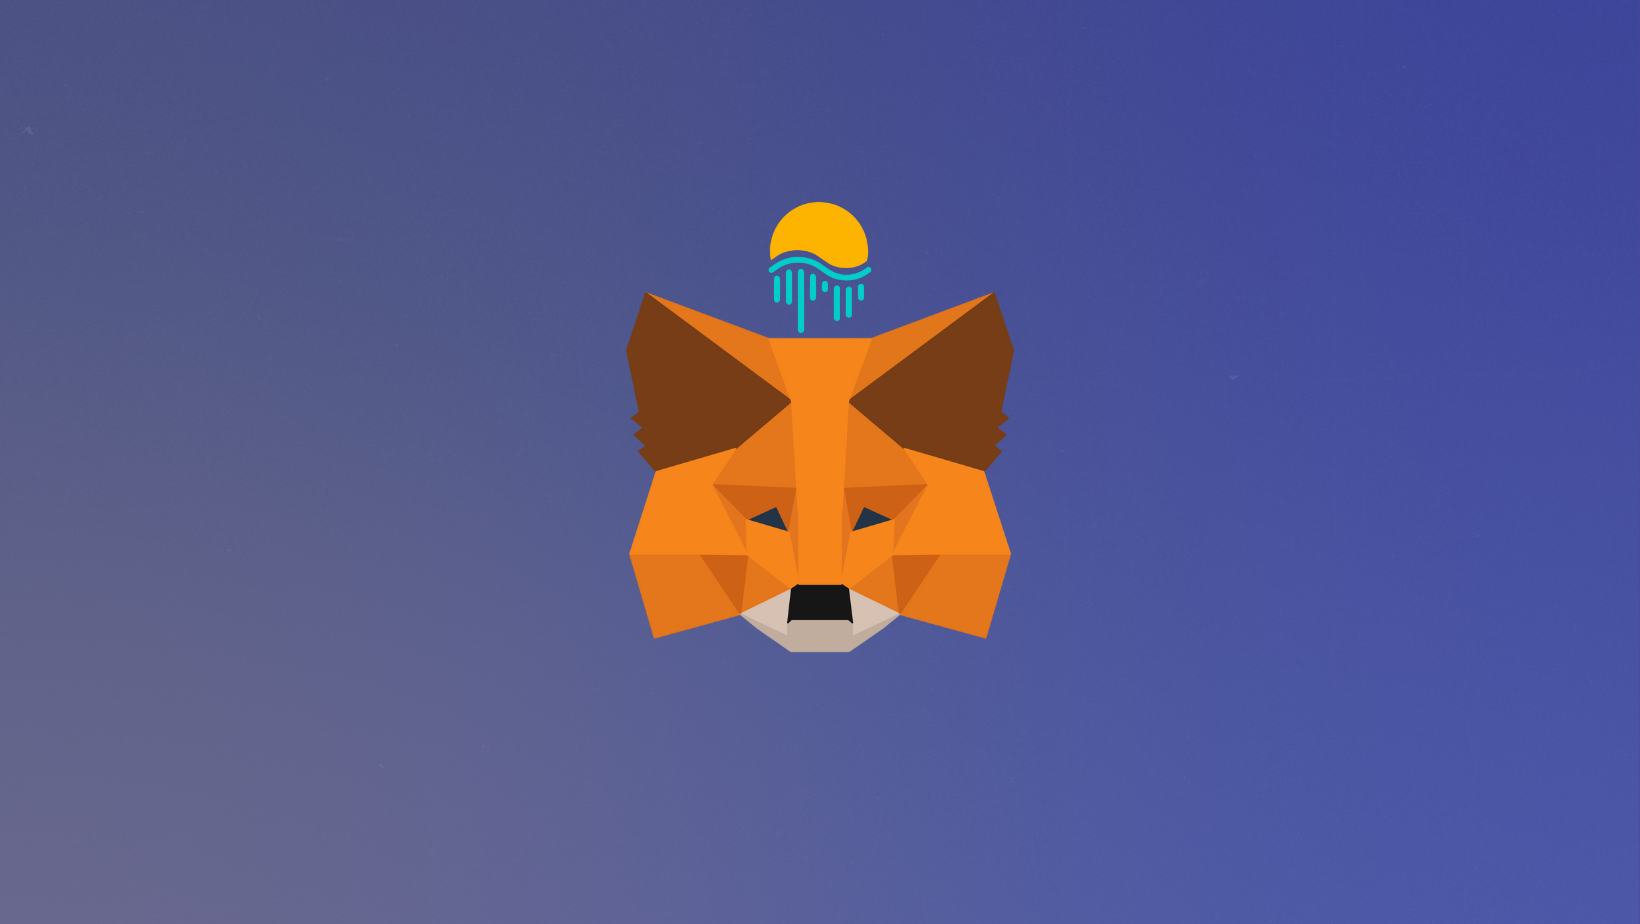 How to add Moonriver (MOVR) to MetaMask